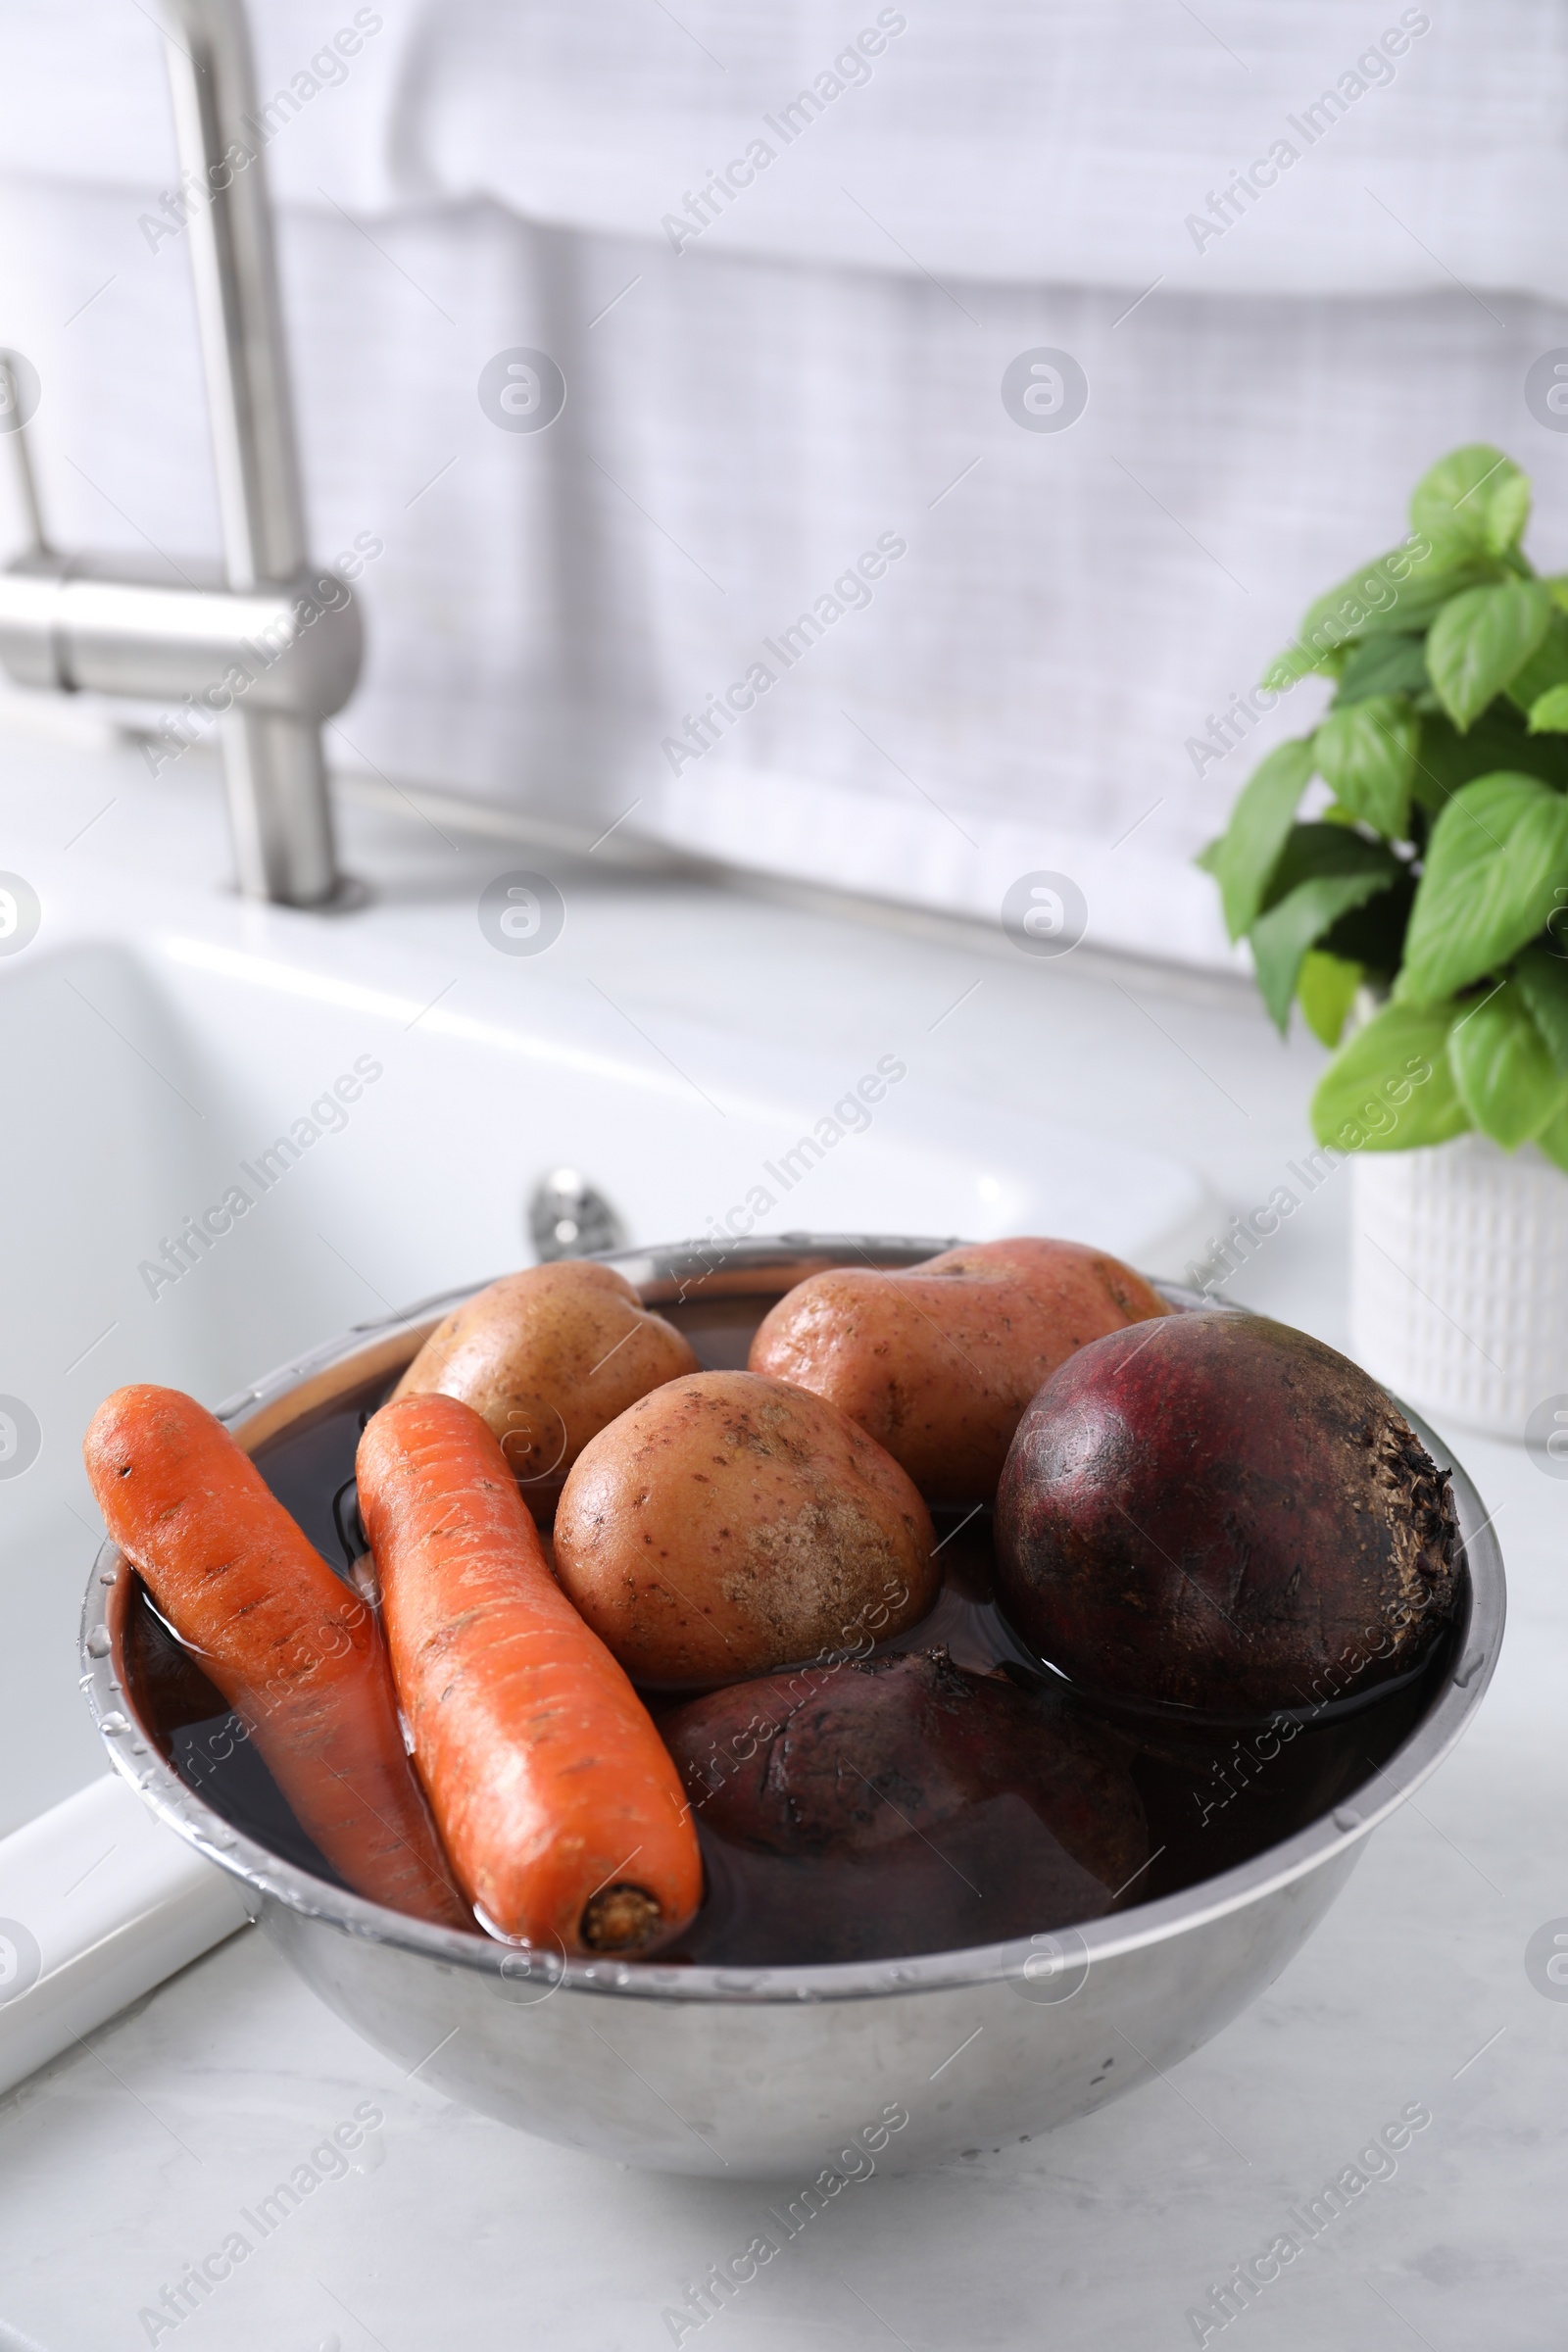 Photo of Fresh vegetables with water in bowl on white countertop. Cooking vinaigrette salad